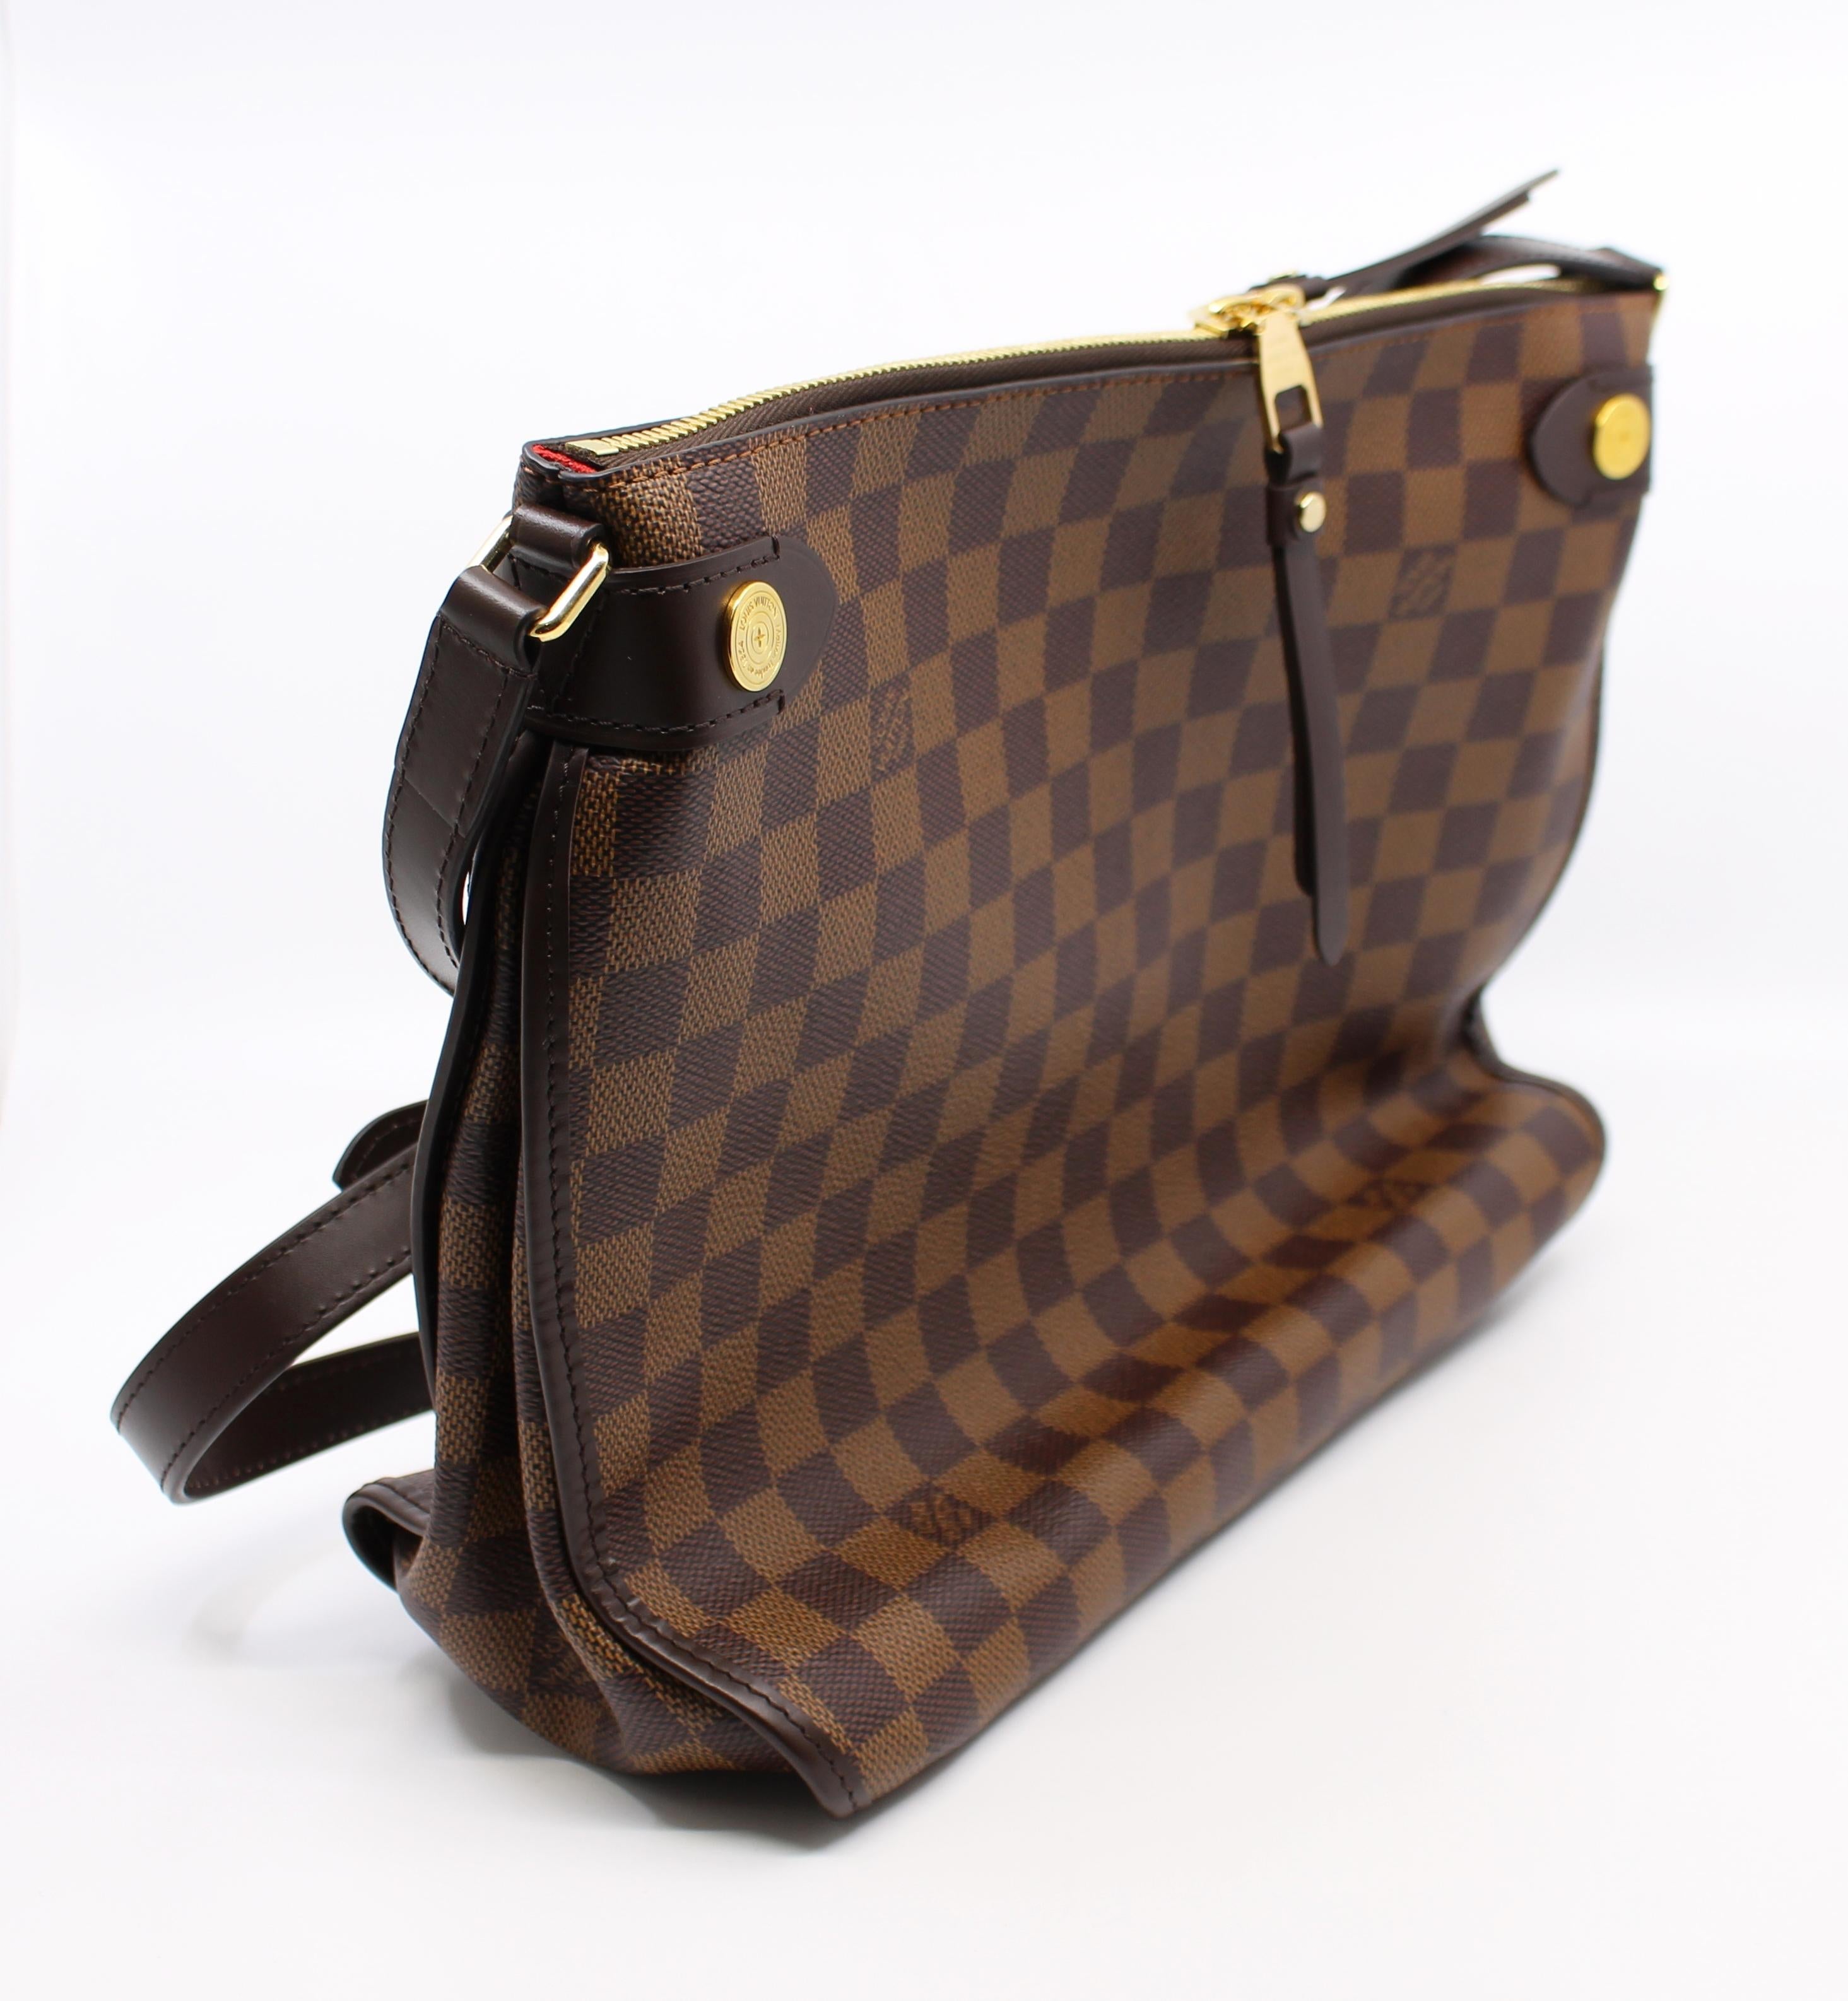 Designer 
Louis Vuitton

Model 
Damier Duomo

Dimensions 
34 x 26 x 12 cm

Condition 
Excellent condition. Never used. Purchased by our client from Louis Vuitton in Las Vegas. Complete in original dust bag. Very minor marks to dust bag
